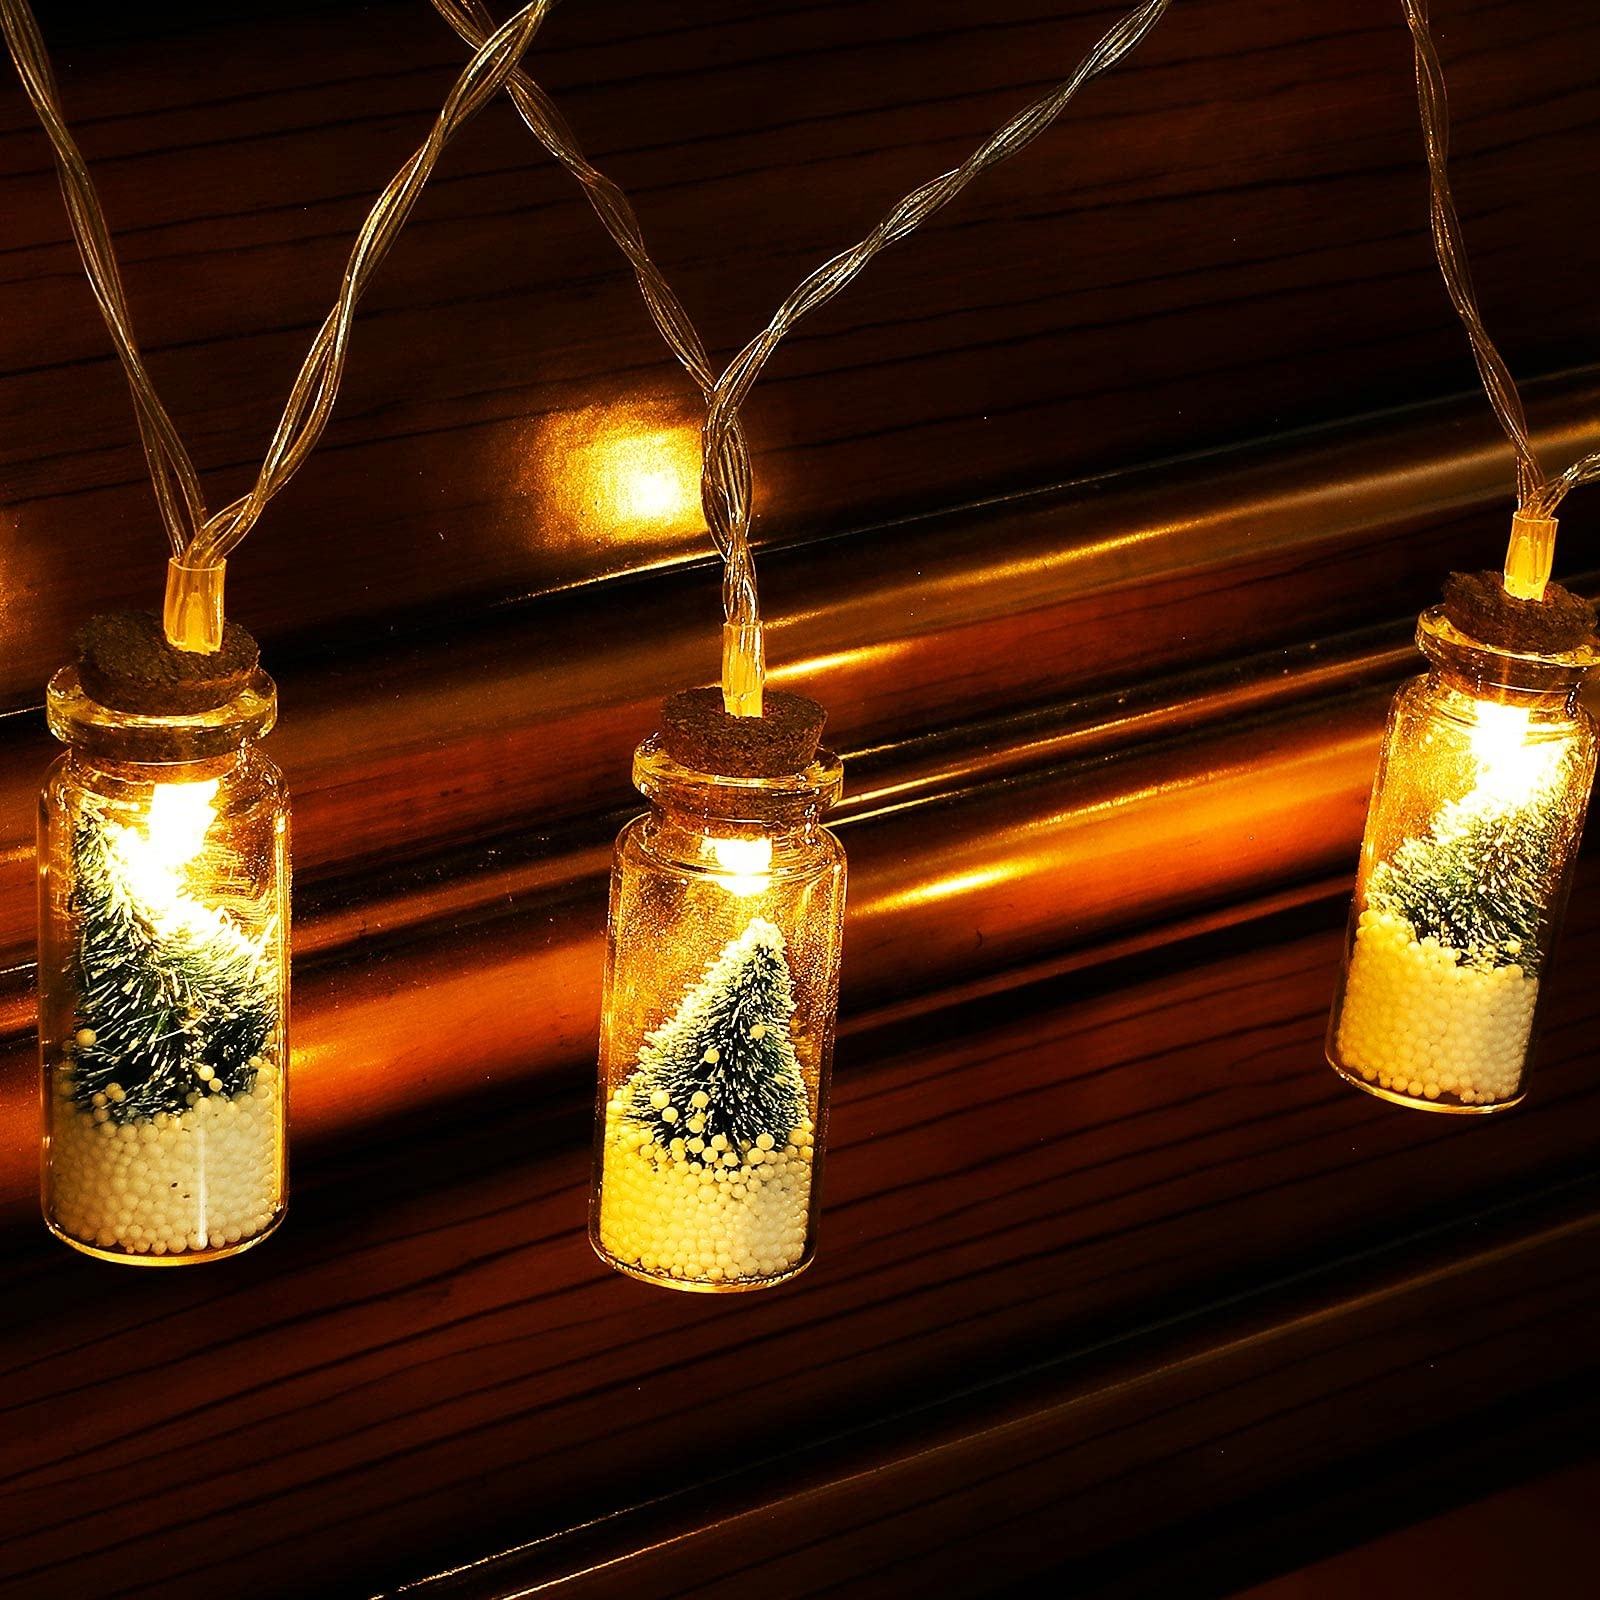 1.5M Outdoor Mini Snowflake Glass Wishing Bottle Christmas Tree Fairy String Lights For Home Party Decor Garden Patio